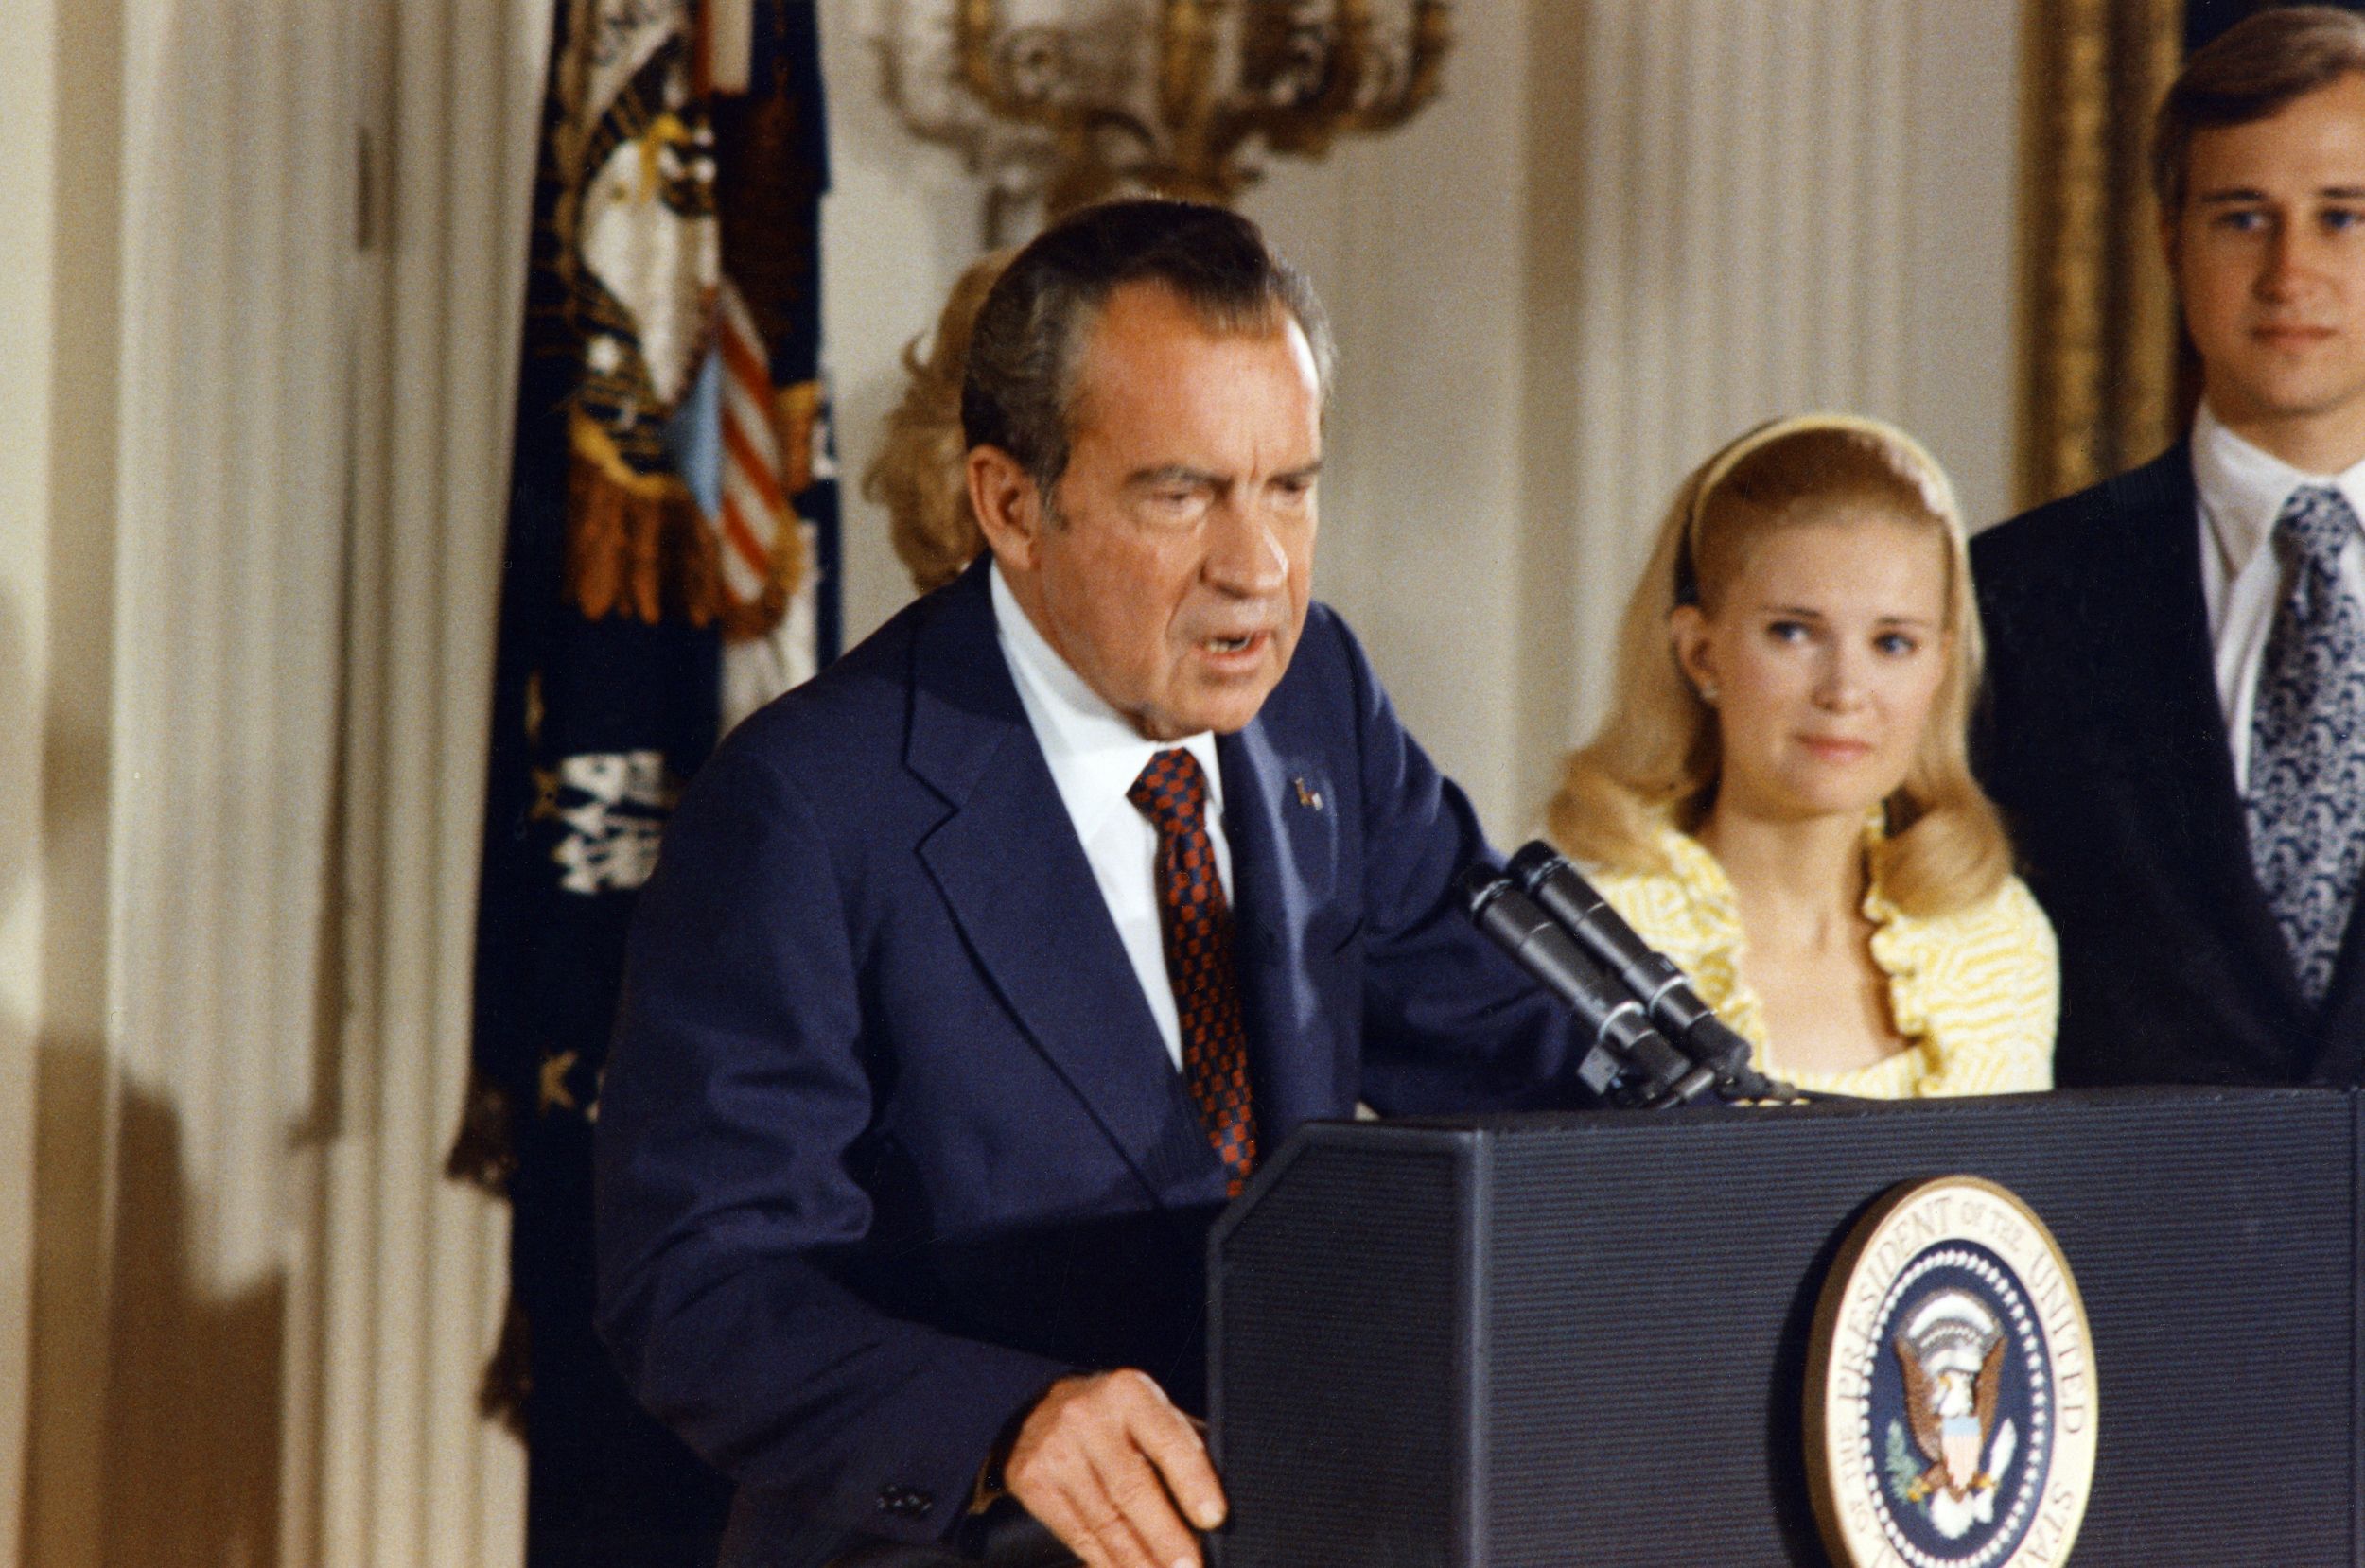 President Richard Nixon bids farewell to the White House staff. (White House/AFP/Getty Images)